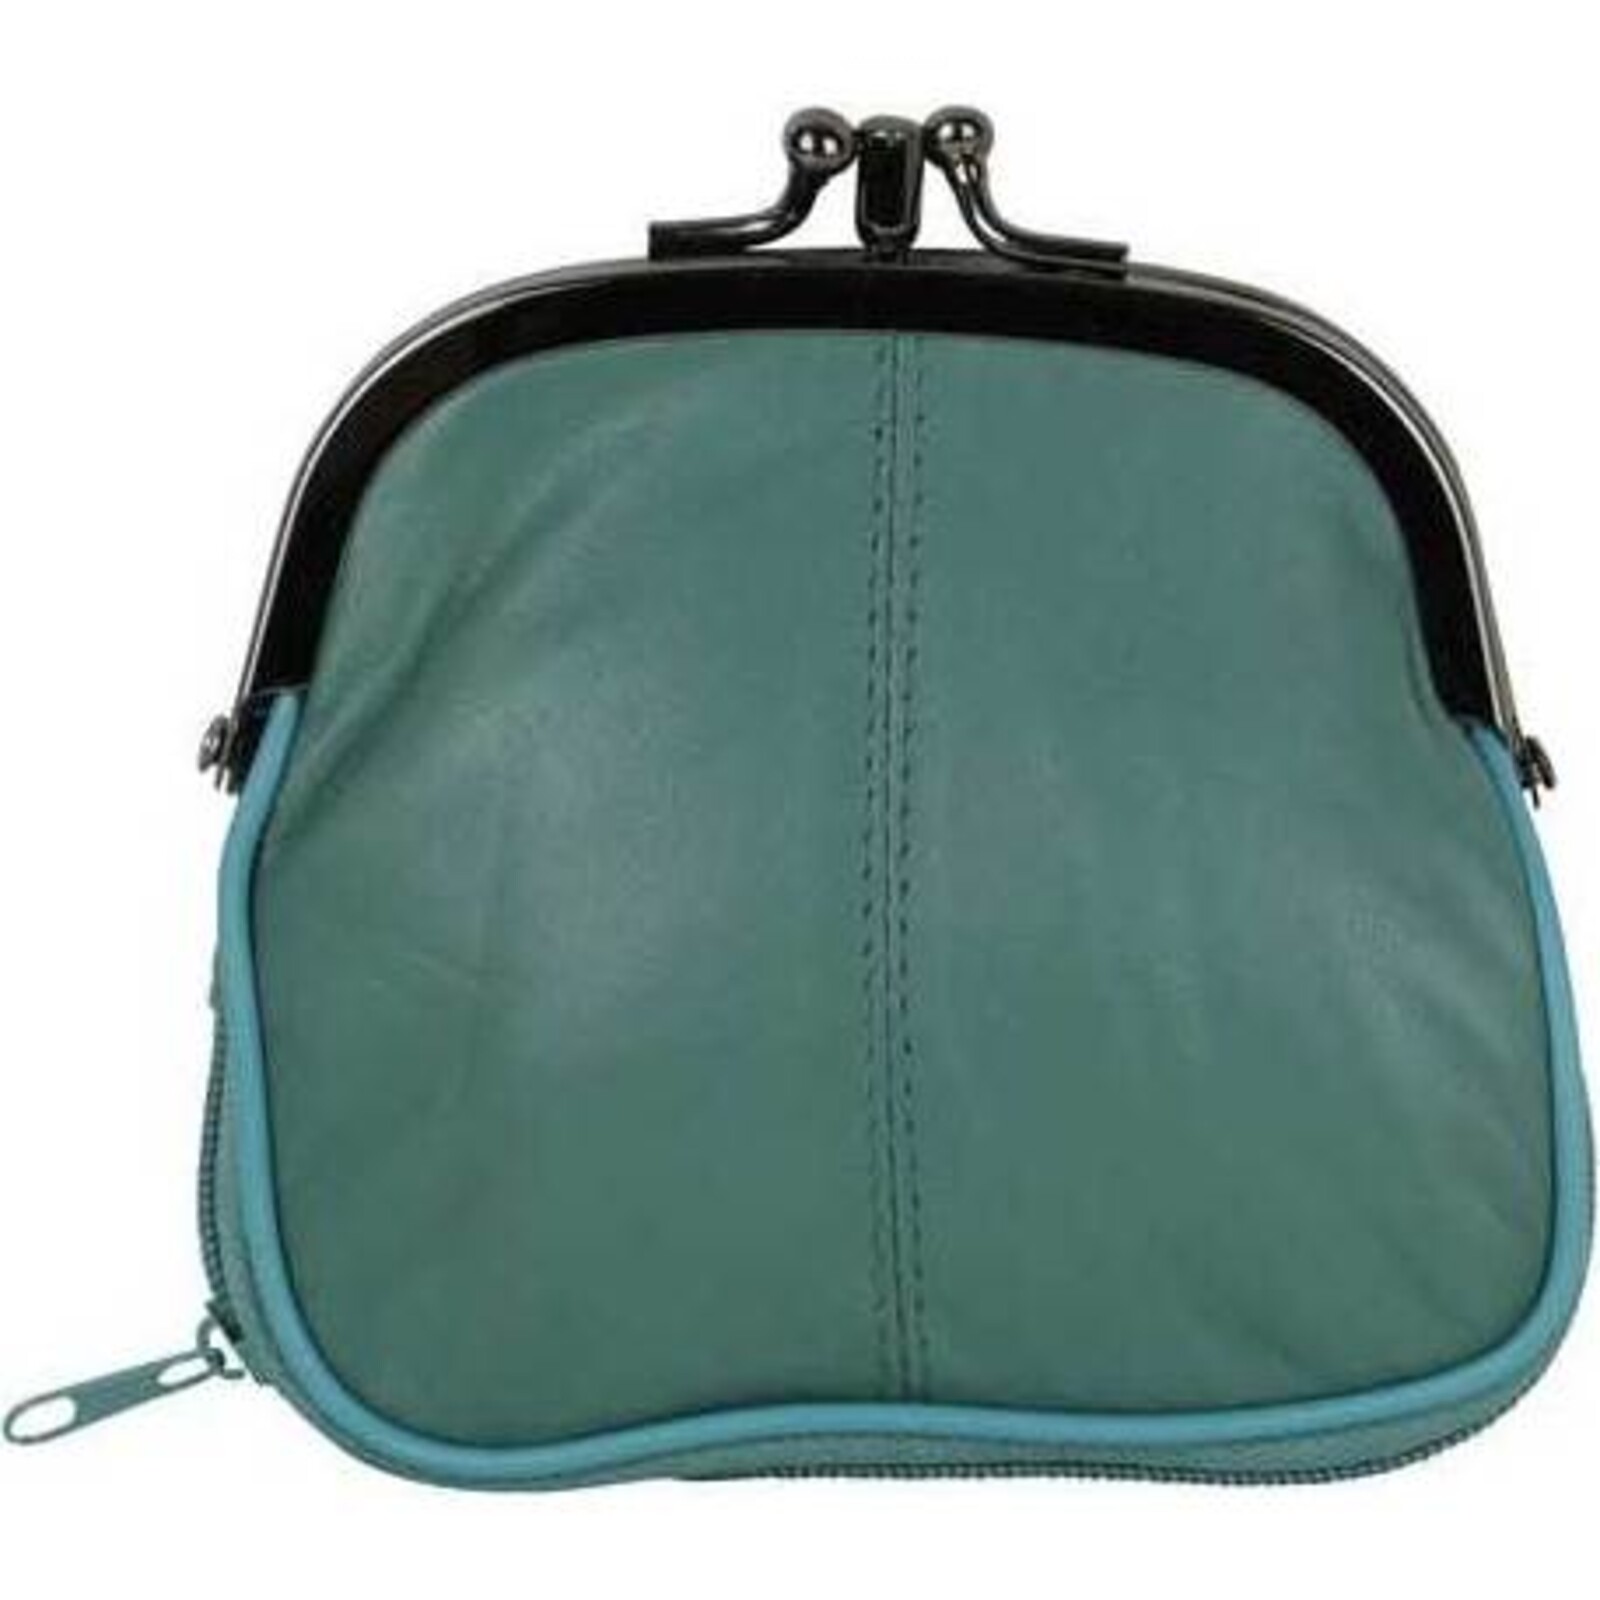 Leather Purse Double Teal